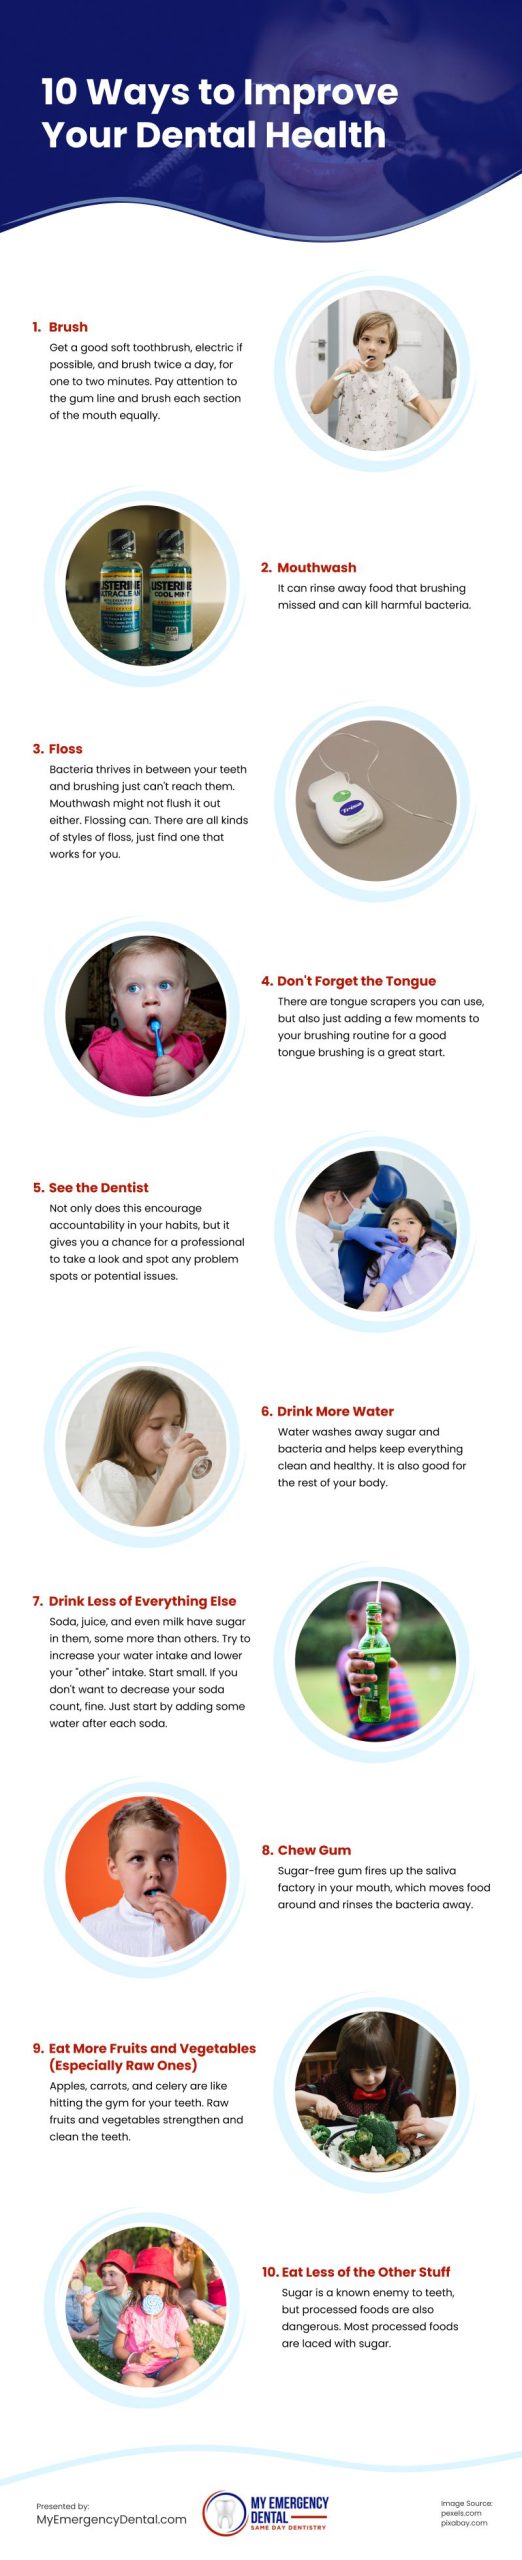 10 Ways to Improve Your Dental Health Infographic